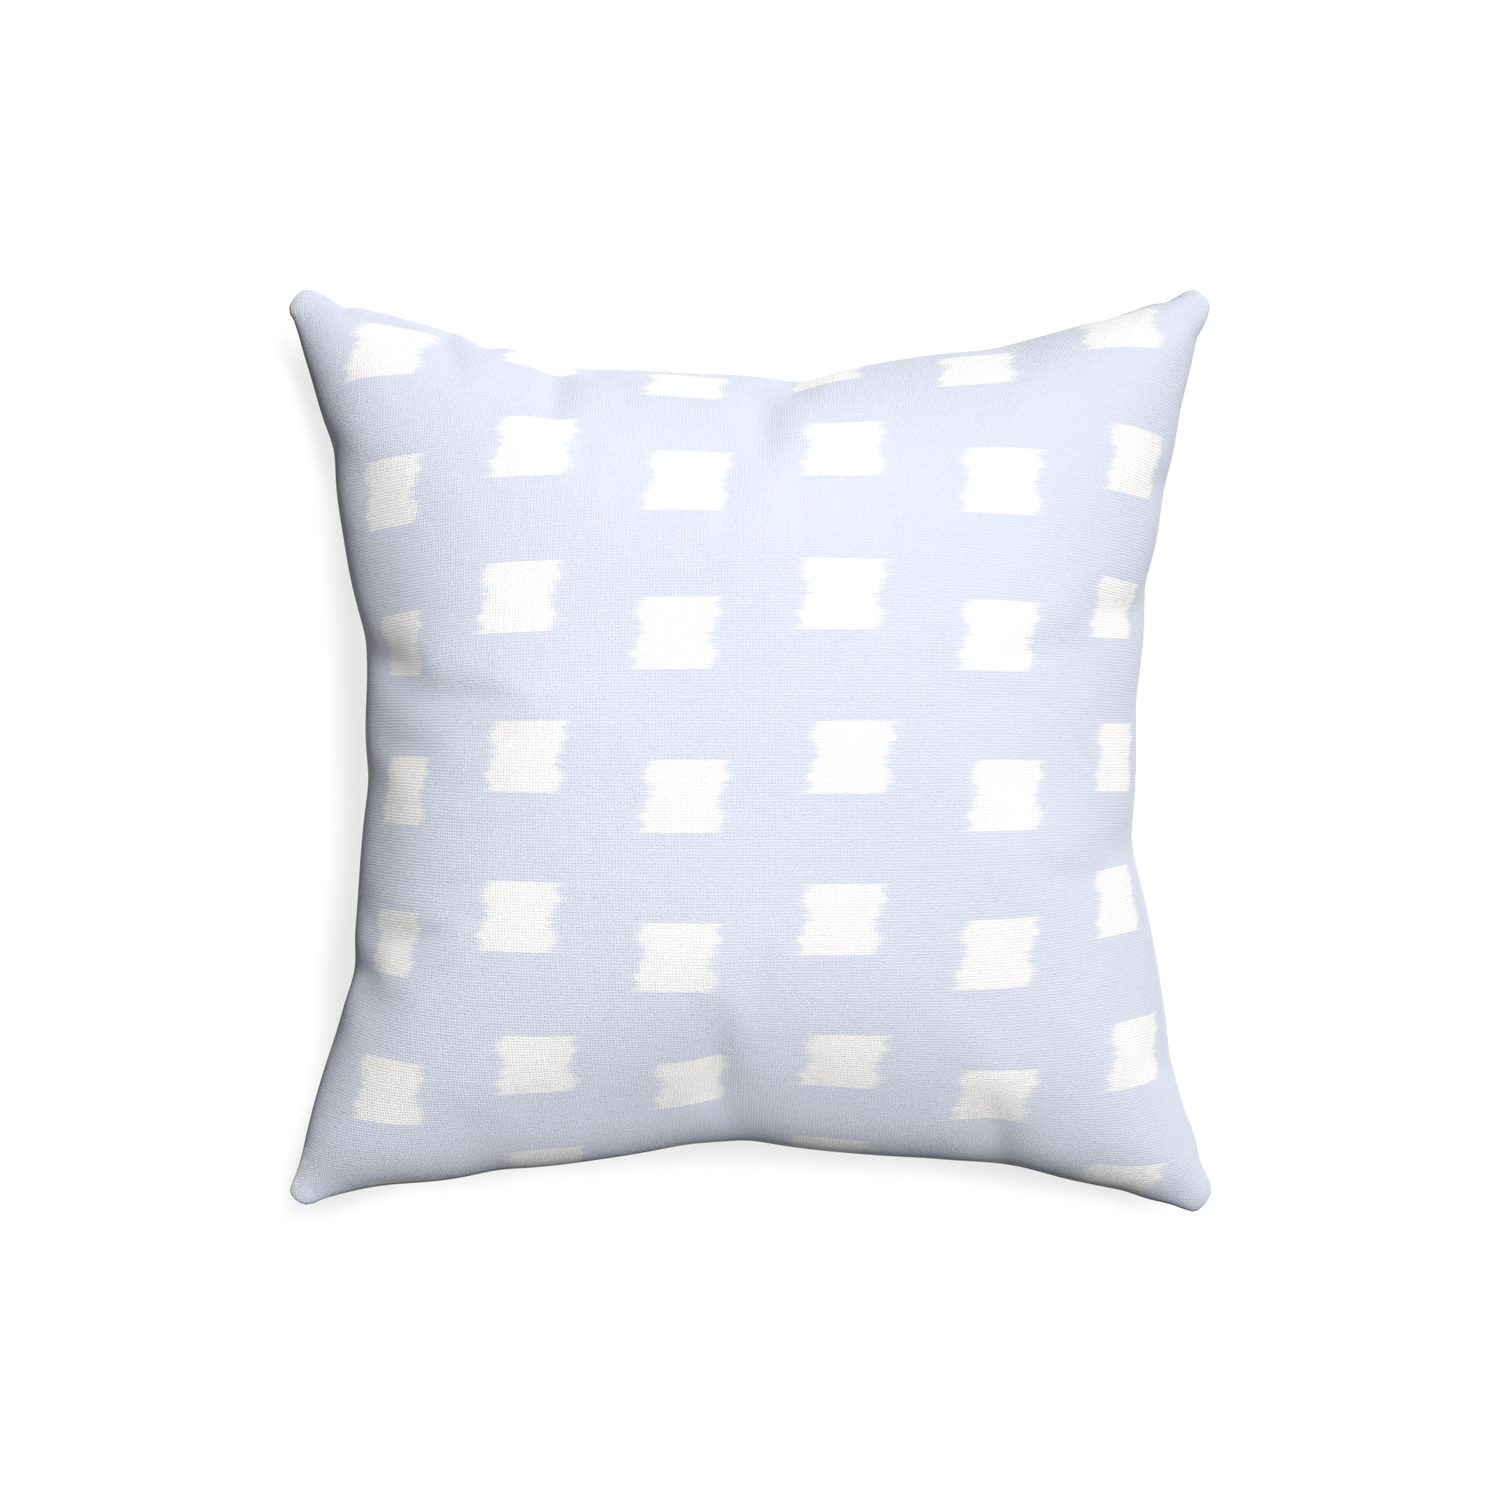 20-square denton custom sky blue patternpillow with none on white background